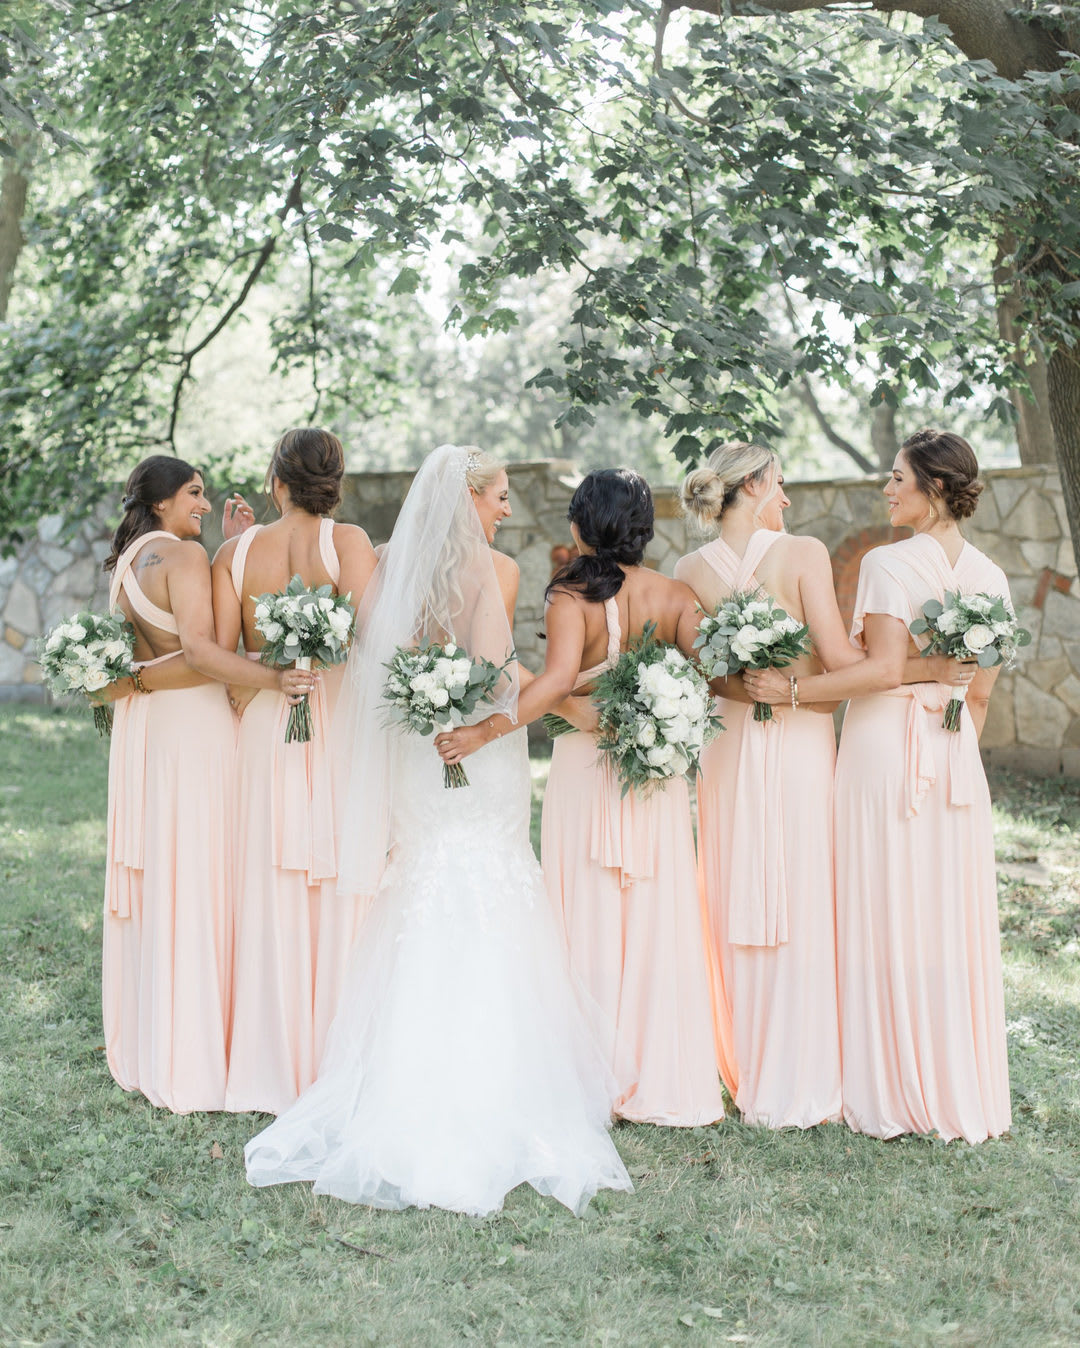 How to Pick Bridesmaid Dresses: The Complete Guide